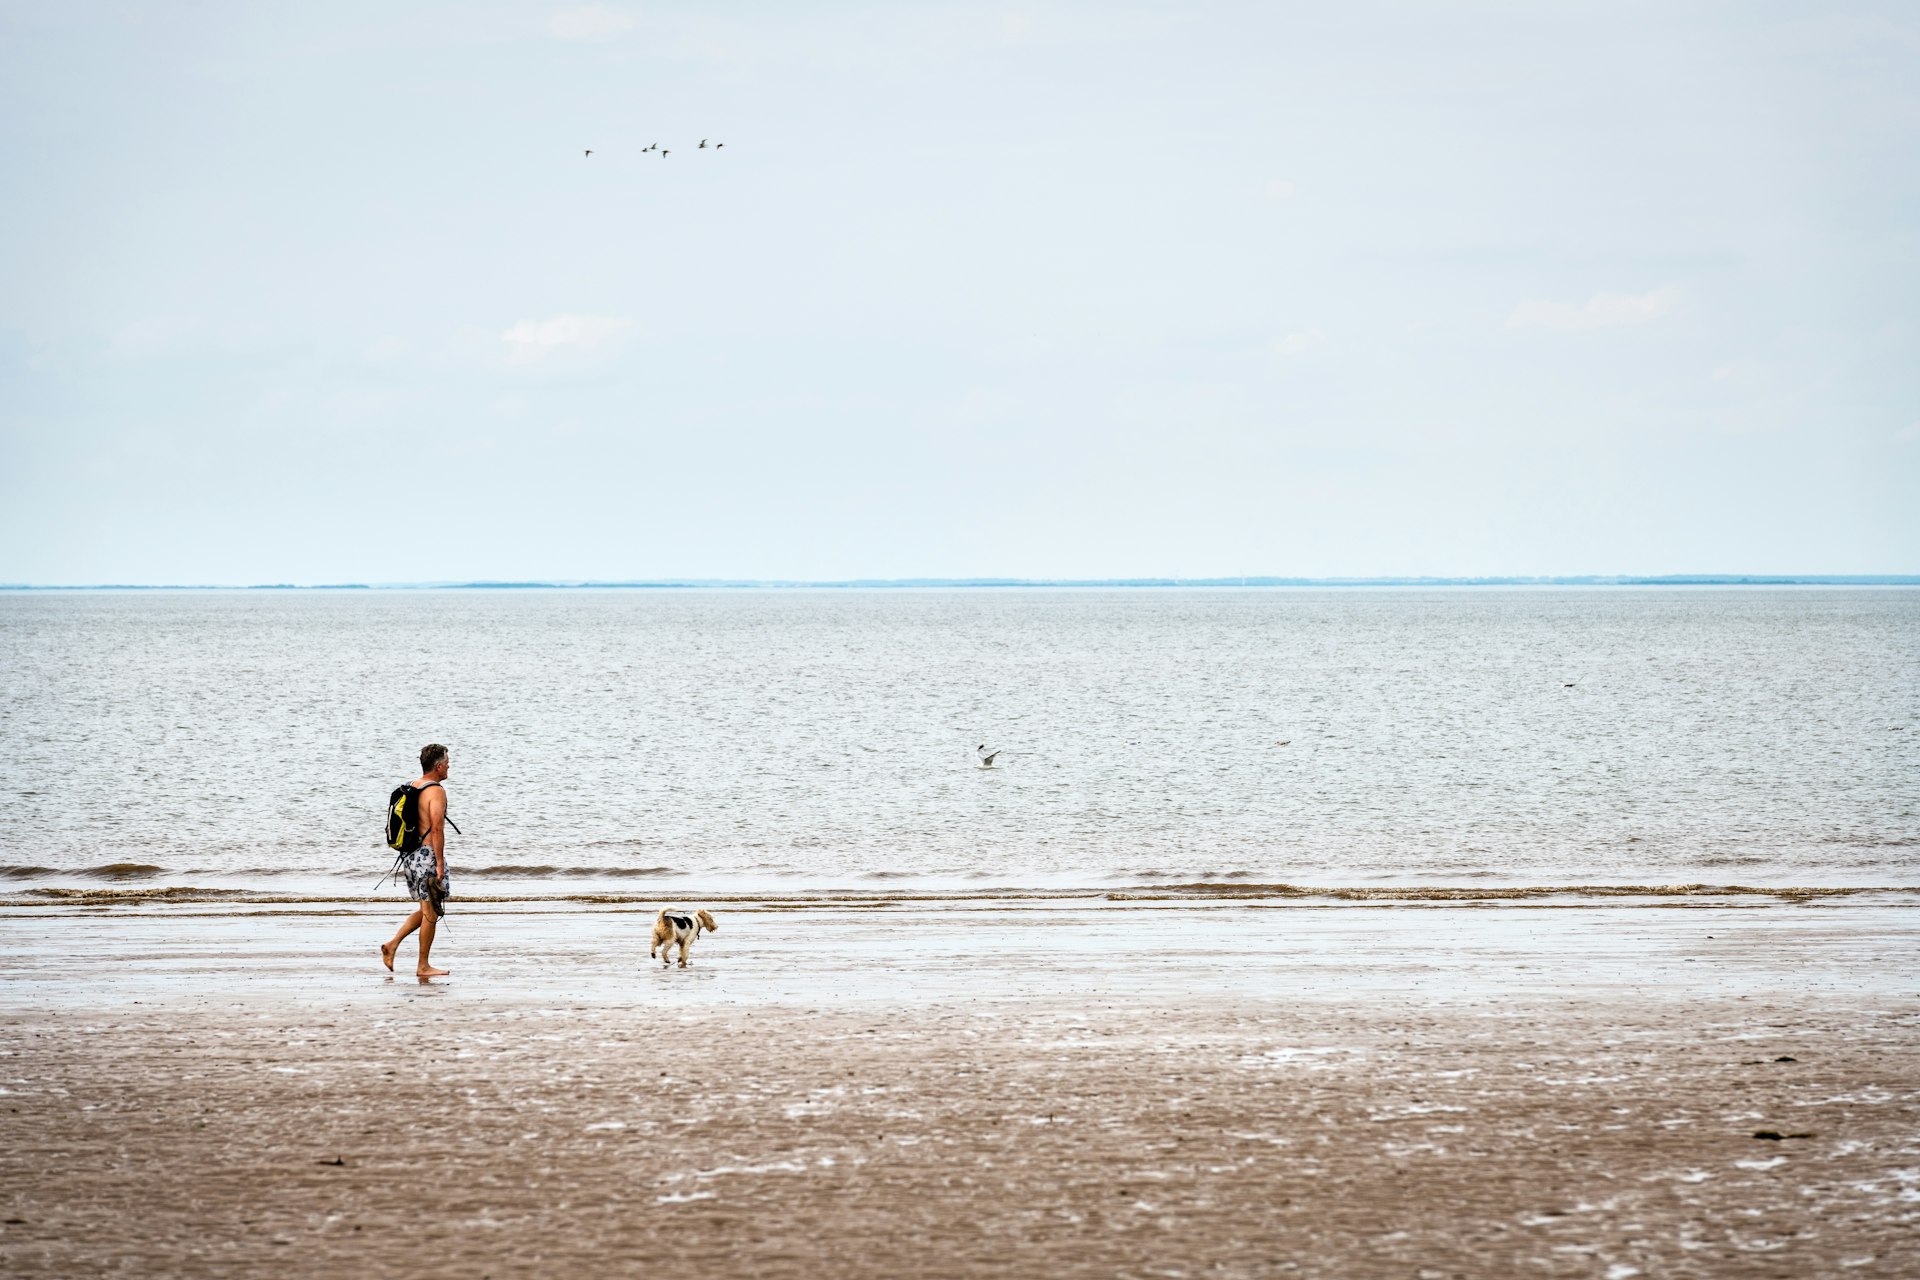 A man walks his dog on the beach at the Holkham National Nature Reserve in the United Kingdom on a cloudy summer day